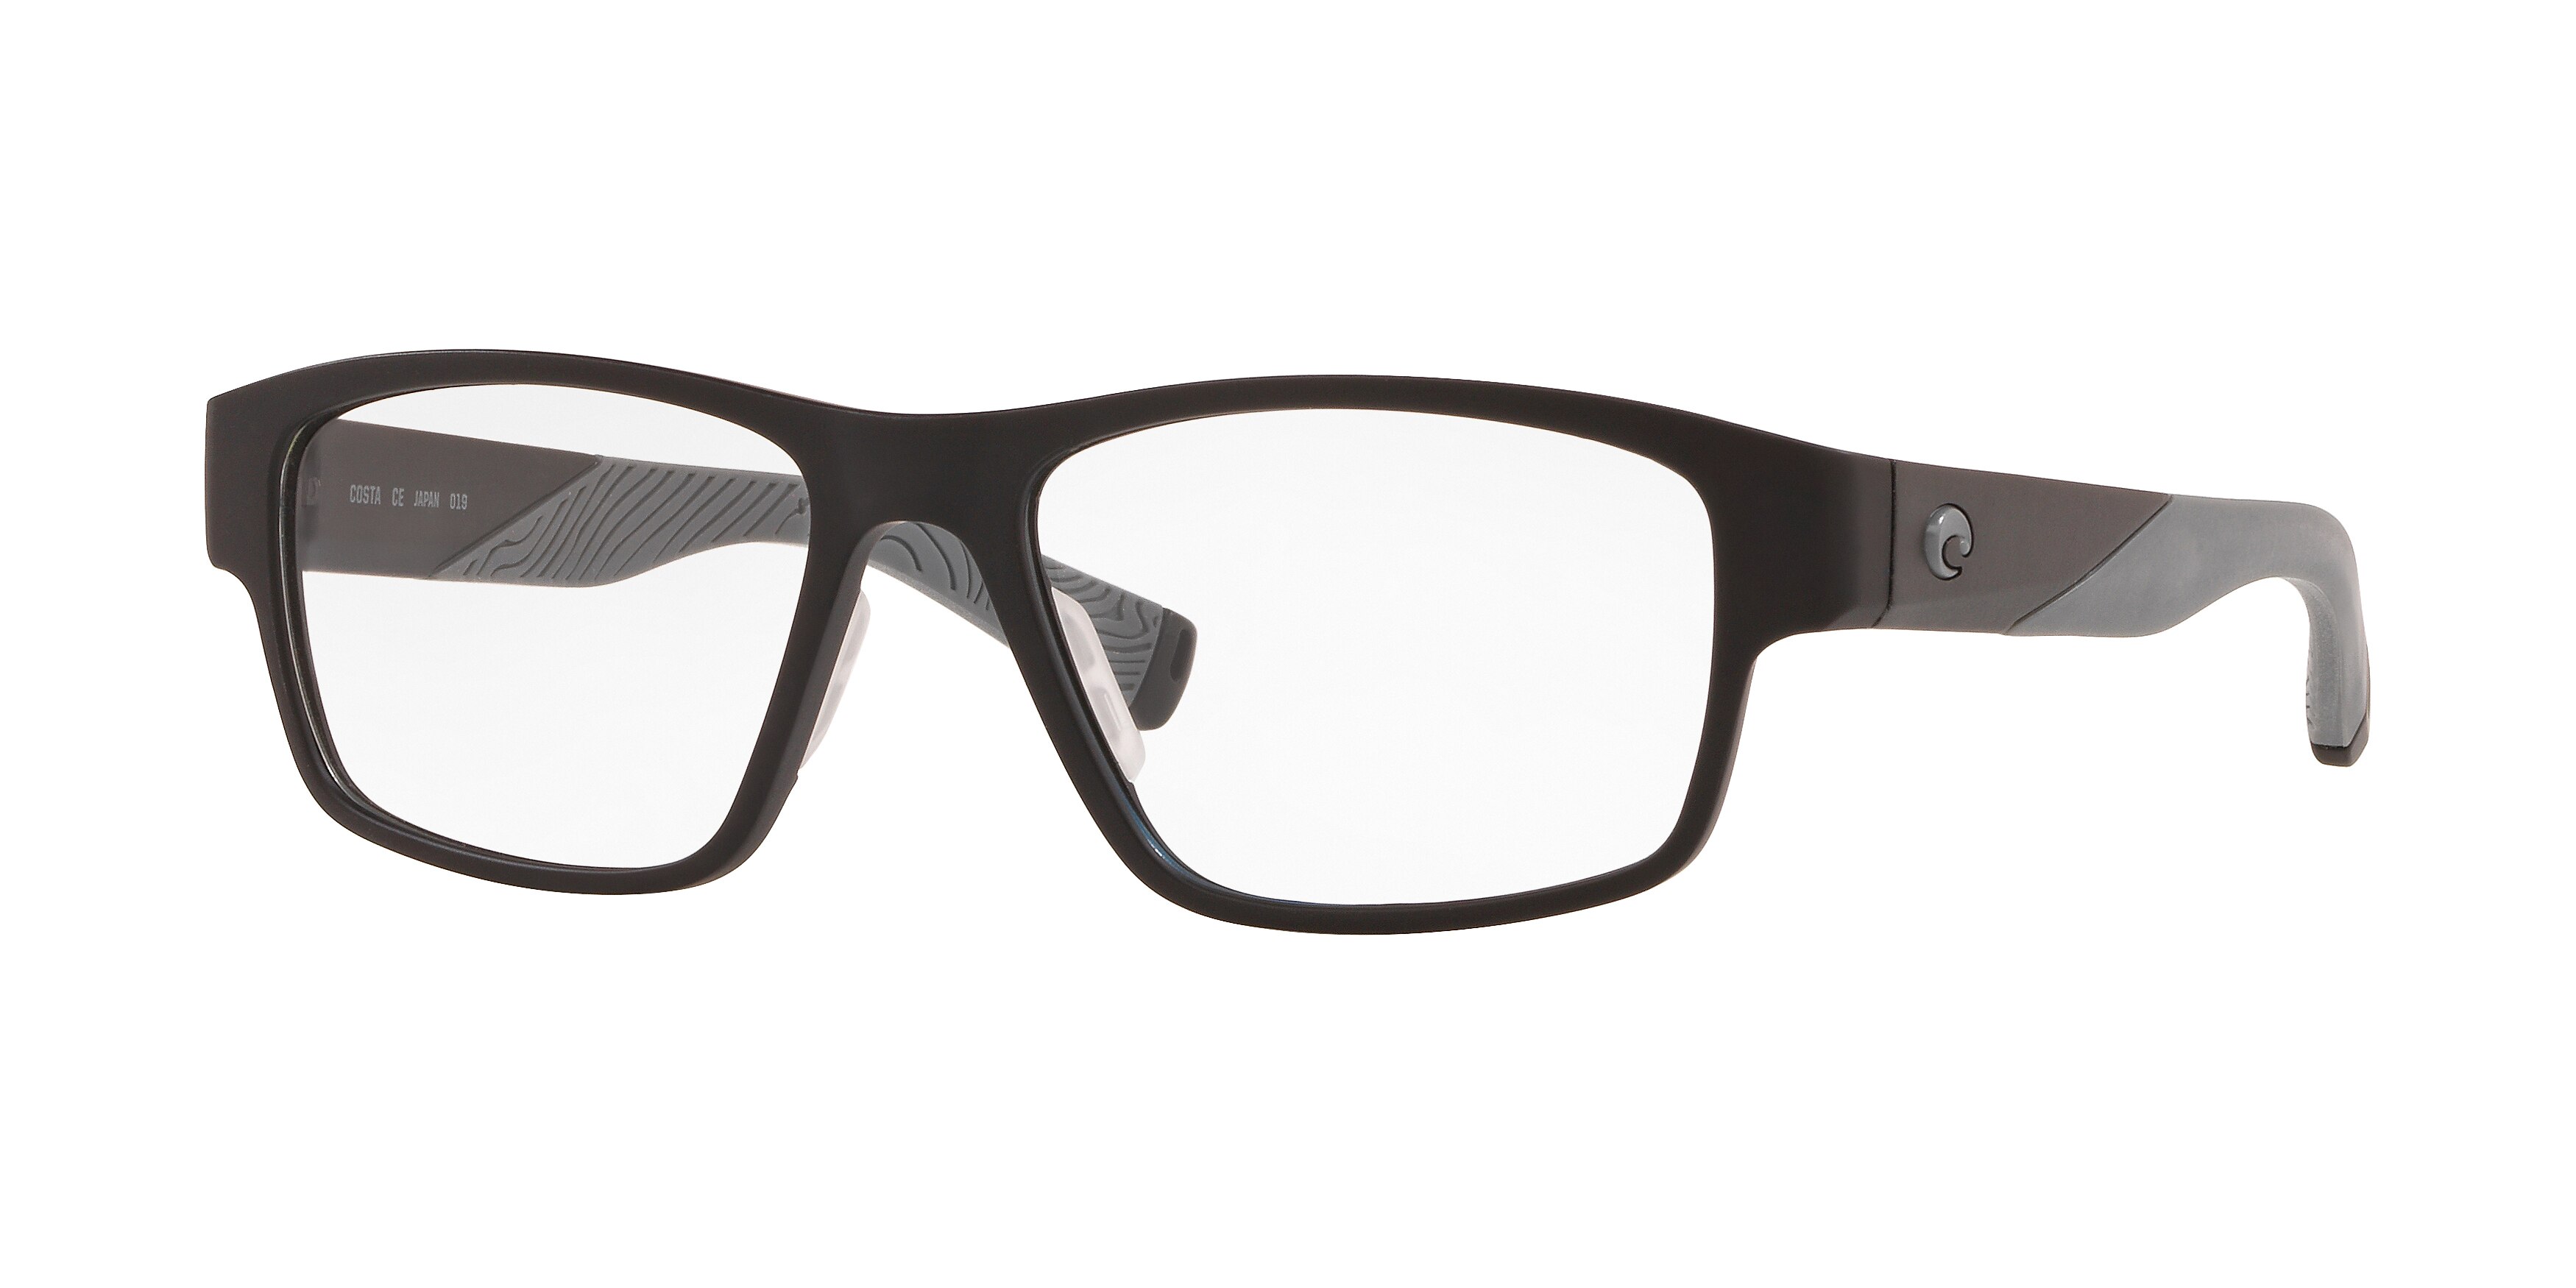  clear/264 mt black frame gray rubber